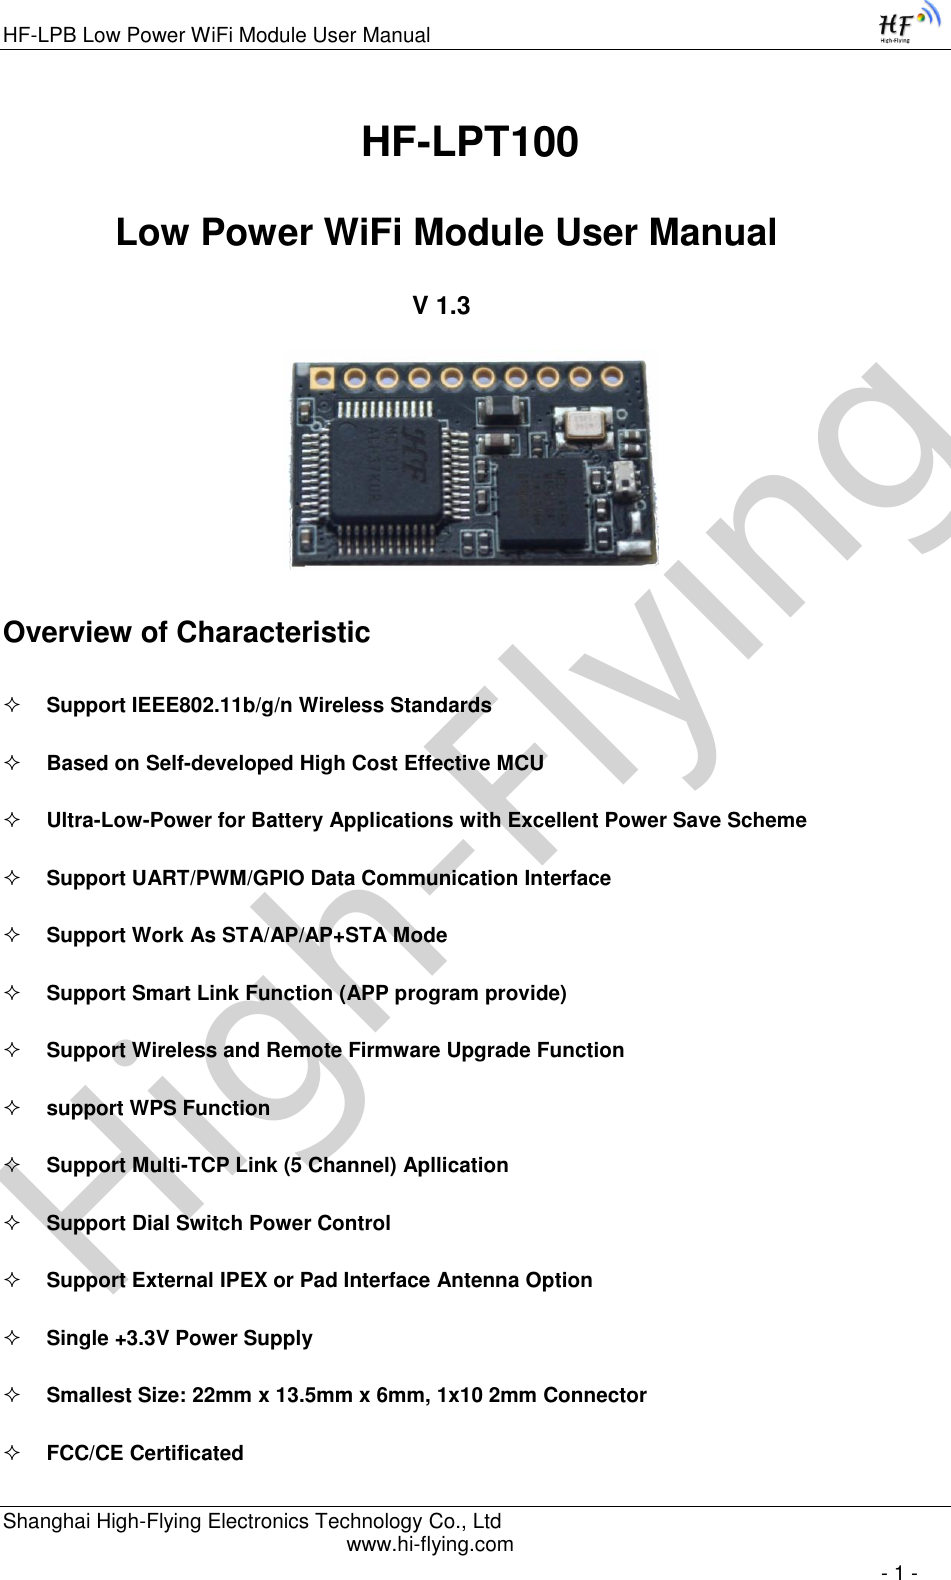 High-FlyingHF-LPB Low Power WiFi Module User Manual Shanghai High-Flying Electronics Technology Co., Ltd www.hi-flying.com   - 1 -                                HF-LPT100  Low Power WiFi Module User Manual V 1.3         Overview of Characteristic  Support IEEE802.11b/g/n Wireless Standards  Based on Self-developed High Cost Effective MCU  Ultra-Low-Power for Battery Applications with Excellent Power Save Scheme  Support UART/PWM/GPIO Data Communication Interface  Support Work As STA/AP/AP+STA Mode  Support Smart Link Function (APP program provide)  Support Wireless and Remote Firmware Upgrade Function  support WPS Function  Support Multi-TCP Link (5 Channel) Apllication  Support Dial Switch Power Control  Support External IPEX or Pad Interface Antenna Option  Single +3.3V Power Supply  Smallest Size: 22mm x 13.5mm x 6mm, 1x10 2mm Connector  FCC/CE Certificated 